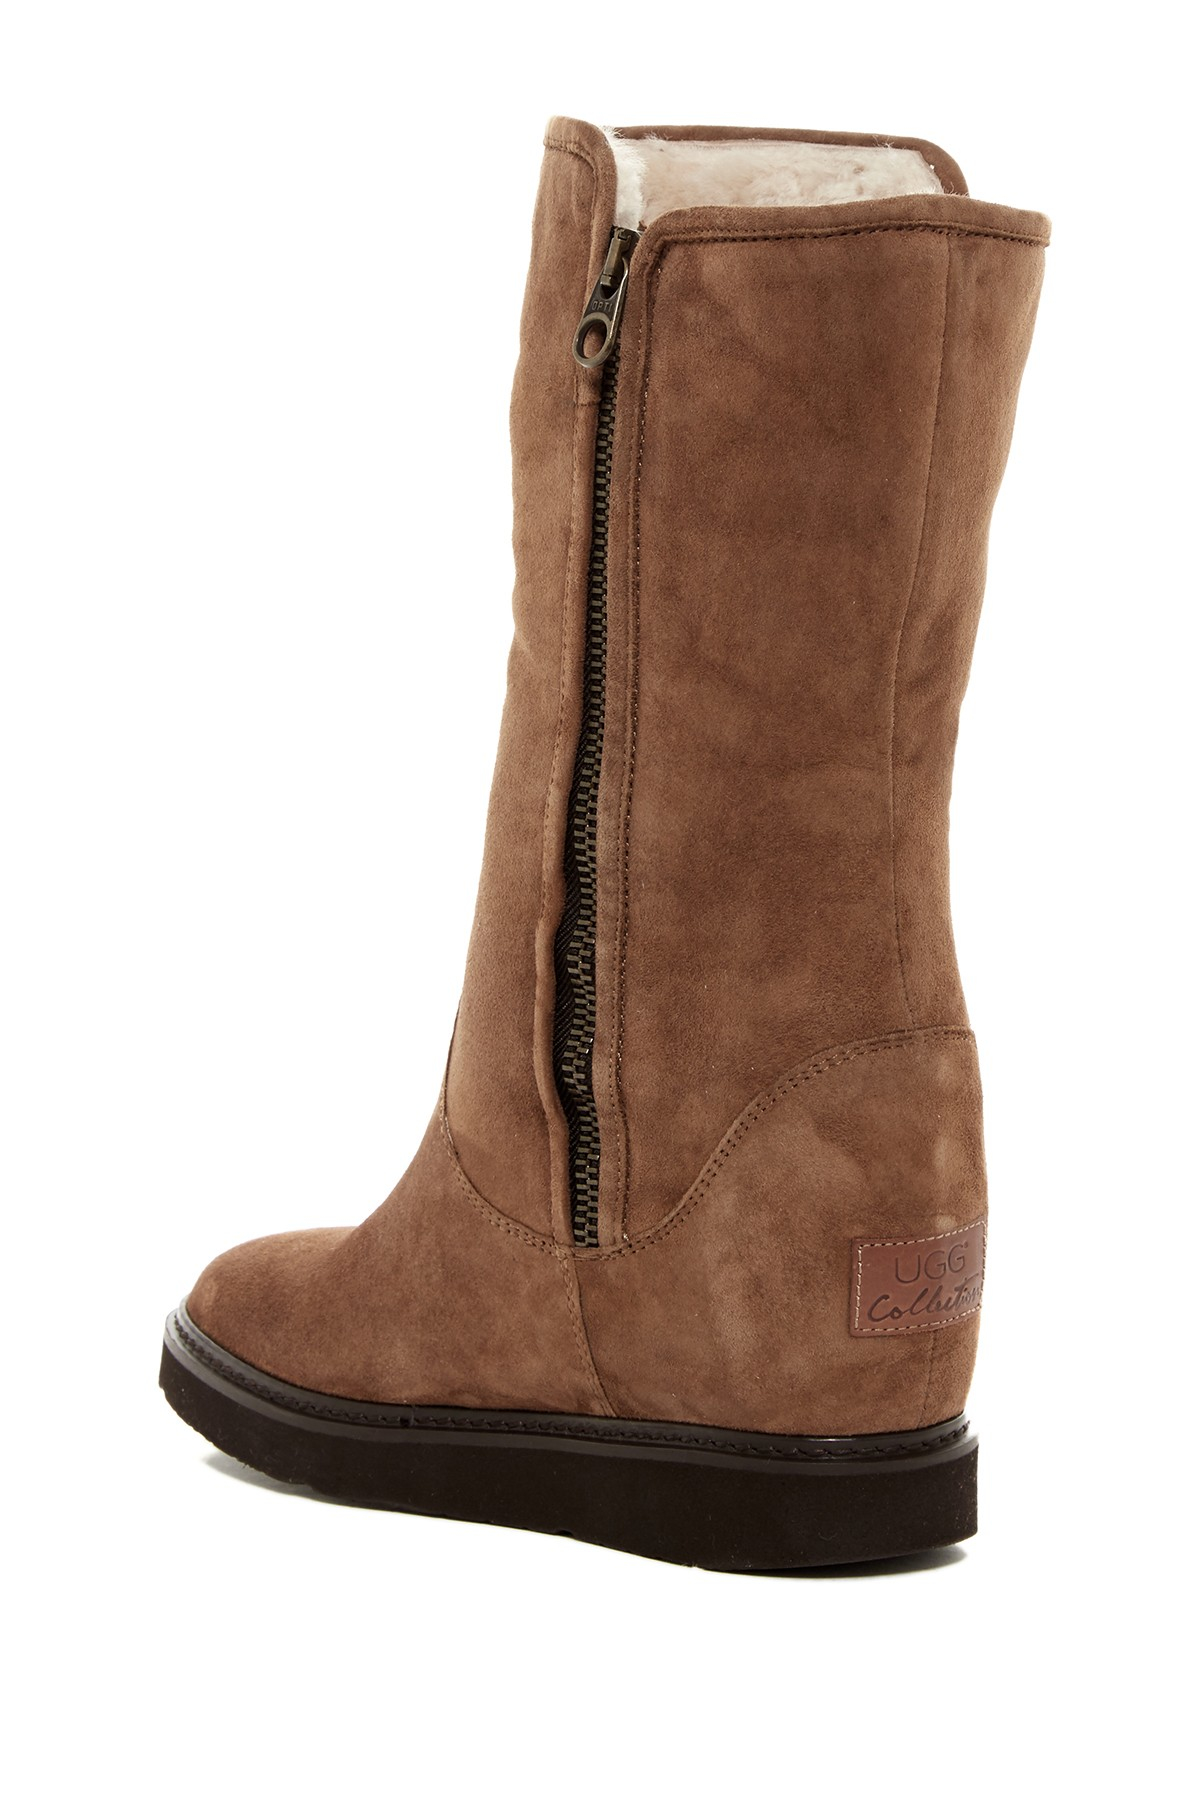 womens wedge boots brown